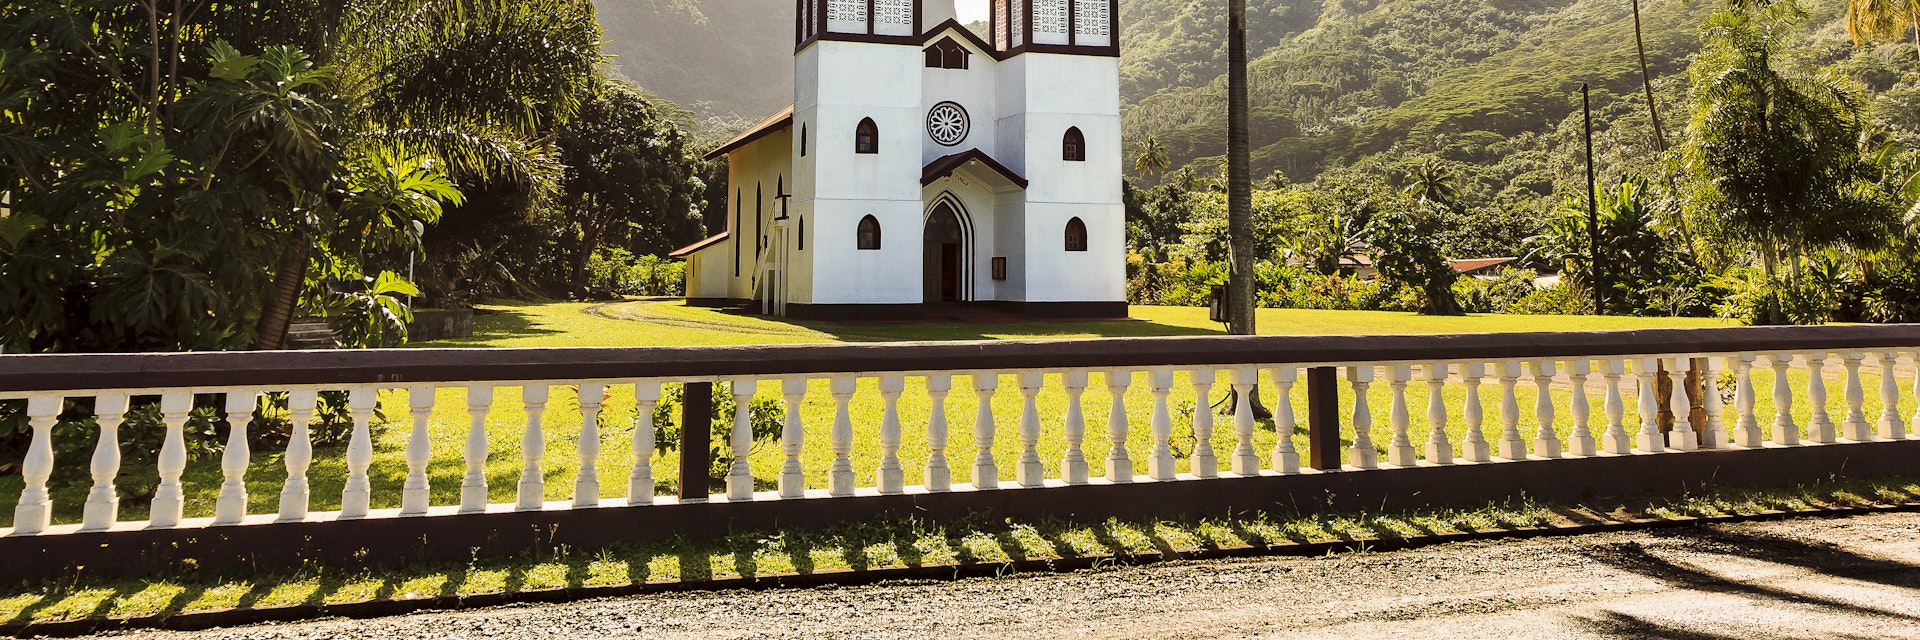 A DSLR photo of Haapiti Chatolic Church in Moorea Island, French Polynesia. The church is located on a big green lawn surrounded by dense tropical forest and mountains in the background. It is a bright sunshine day with blue sky and scattered white clouds. There is no one around.